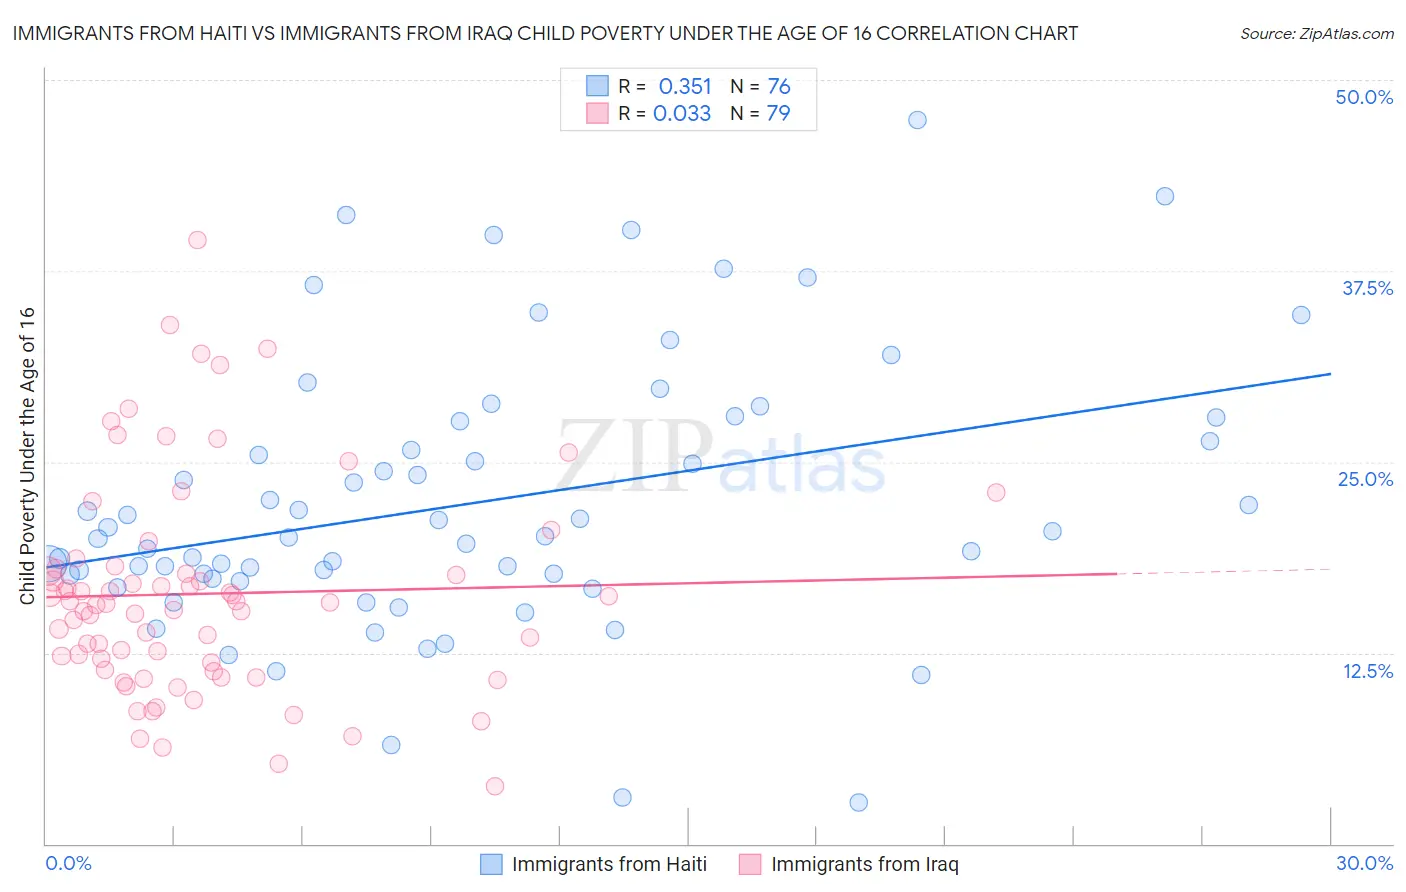 Immigrants from Haiti vs Immigrants from Iraq Child Poverty Under the Age of 16